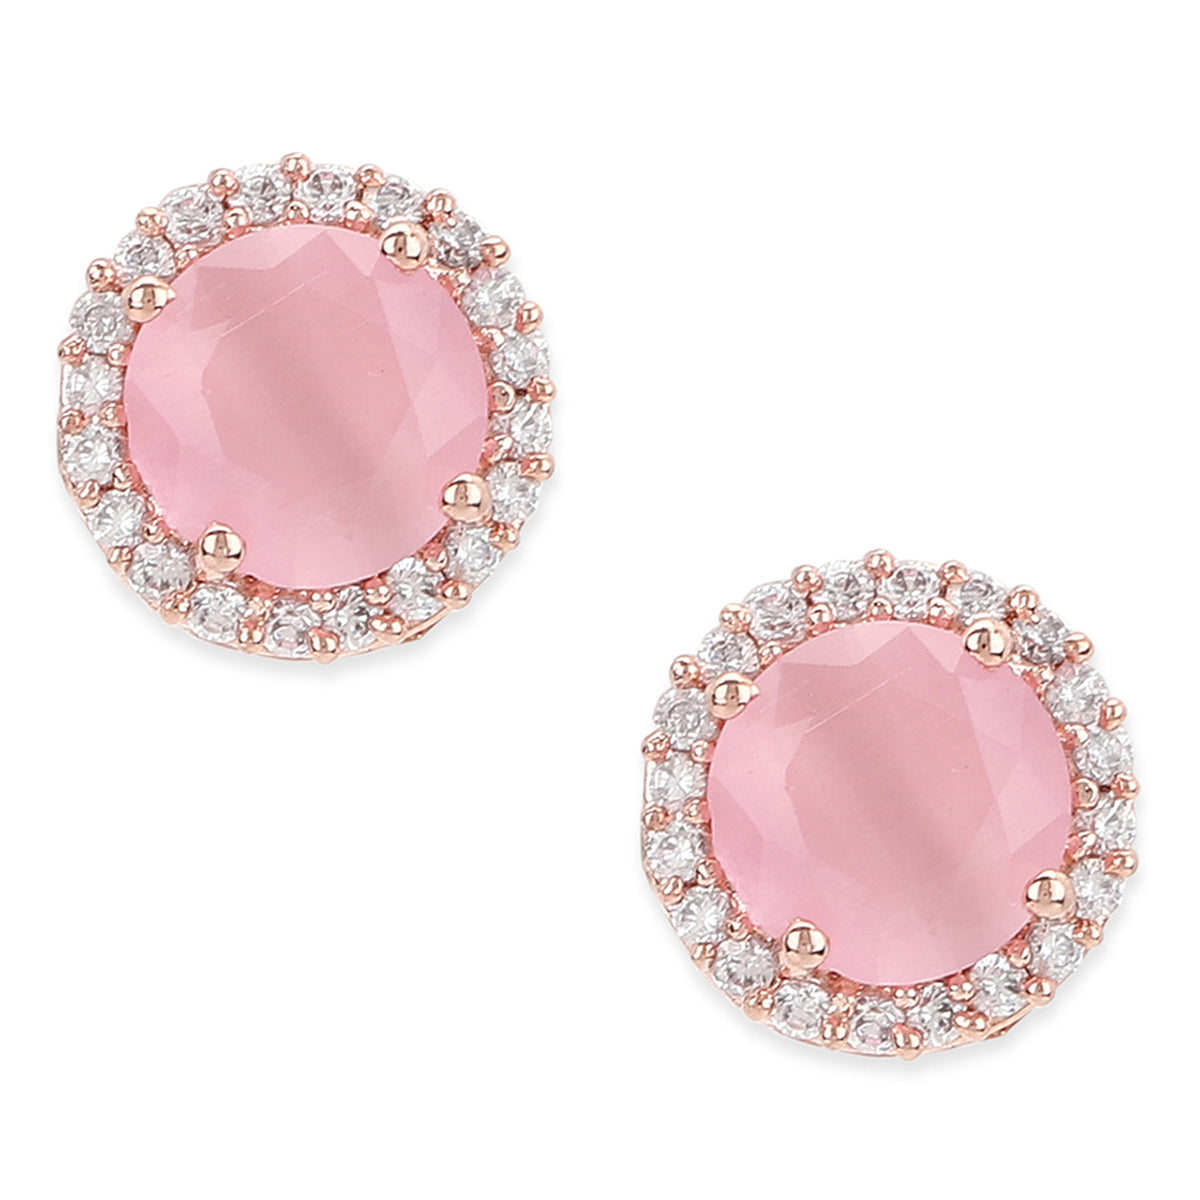 American Diamond CZ Rose Gold Brass Stud Earrings with Pink Stone